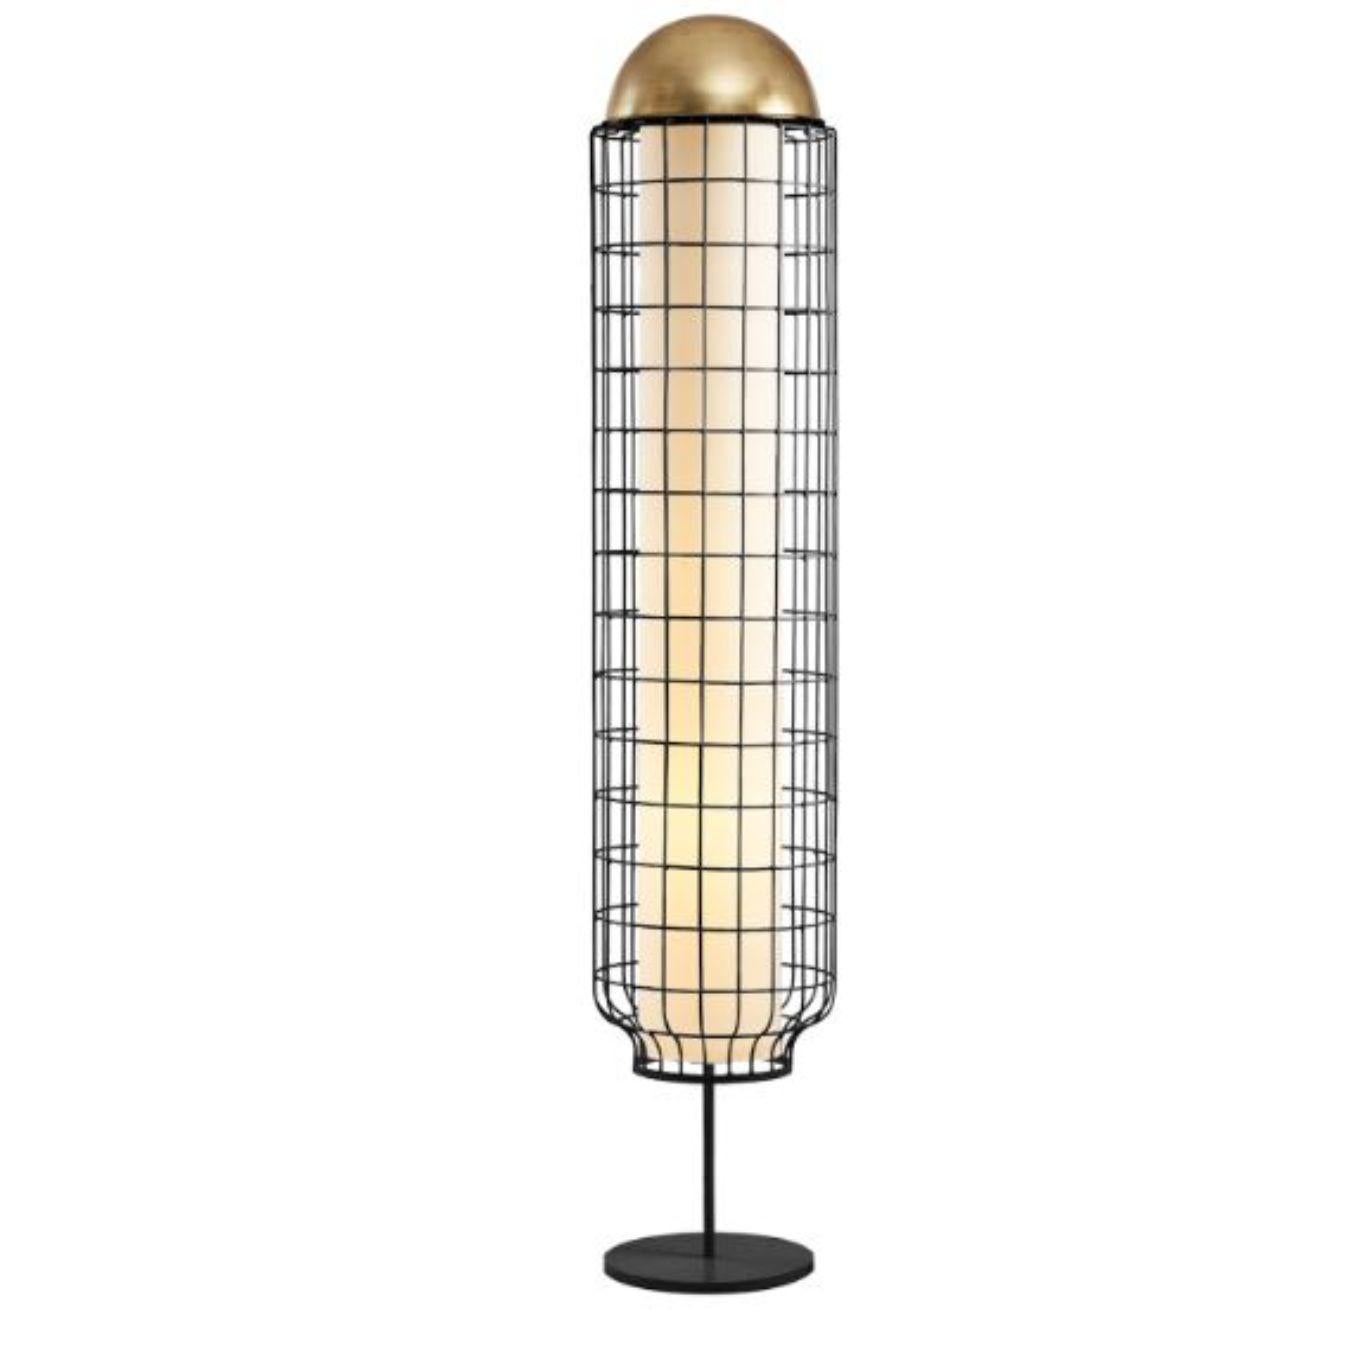 Brass Magnolia floor lamp by Dooq
Dimensions: W 37 x D 37 x H 170 cm
Materials: lacquered metal, polished or brushed metal, brass.
abat-jour: cotton
Also available in different colours and materials.

Information:
230V/50Hz
E27/2x20W